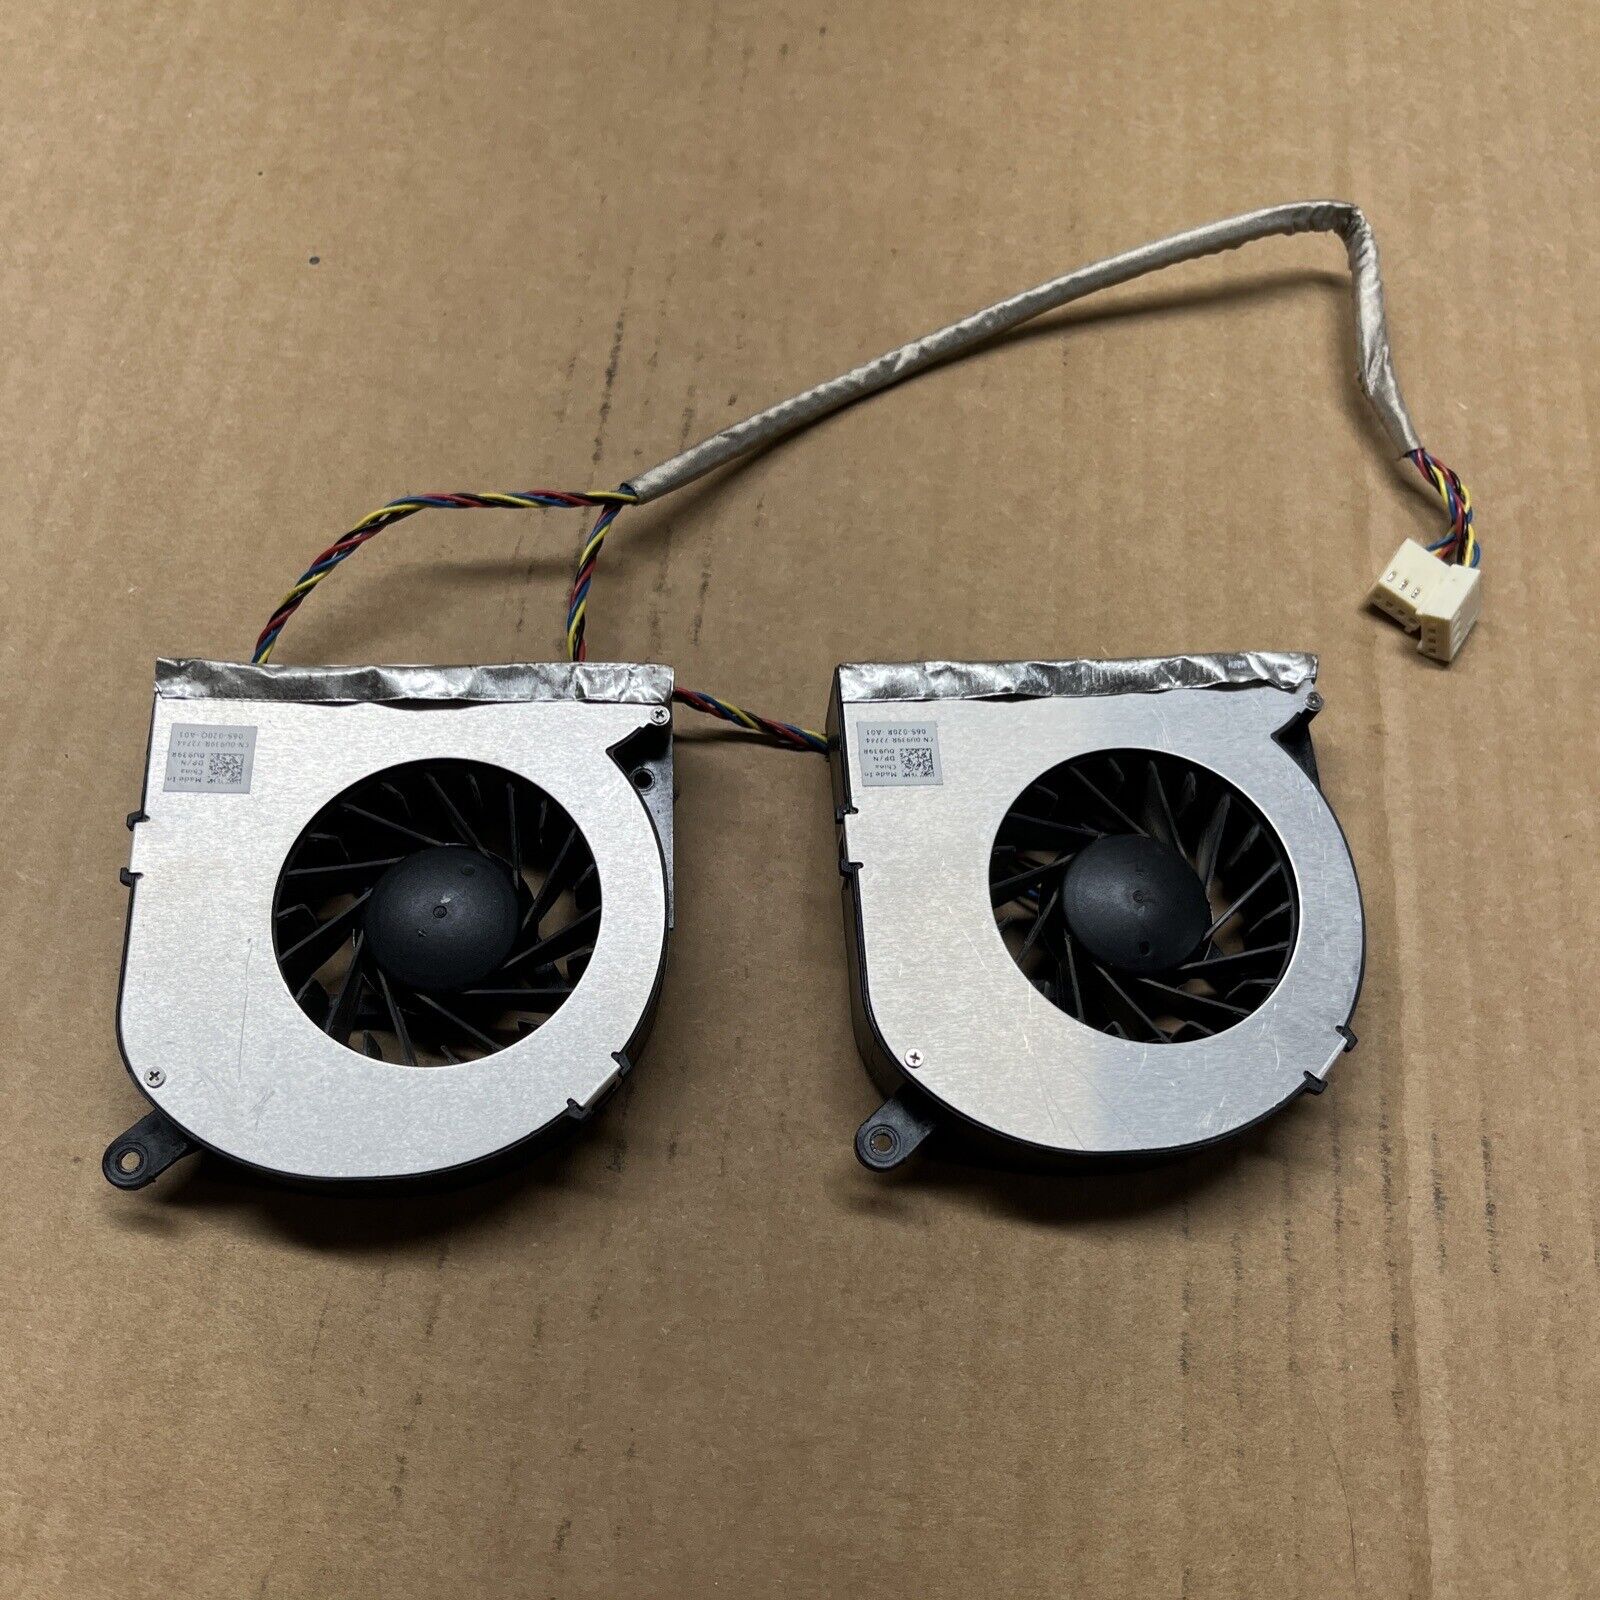 Genuine OEM Dell Vostro 320 All-in-One U939R Cooling Fans 2 Fans Fast shipping